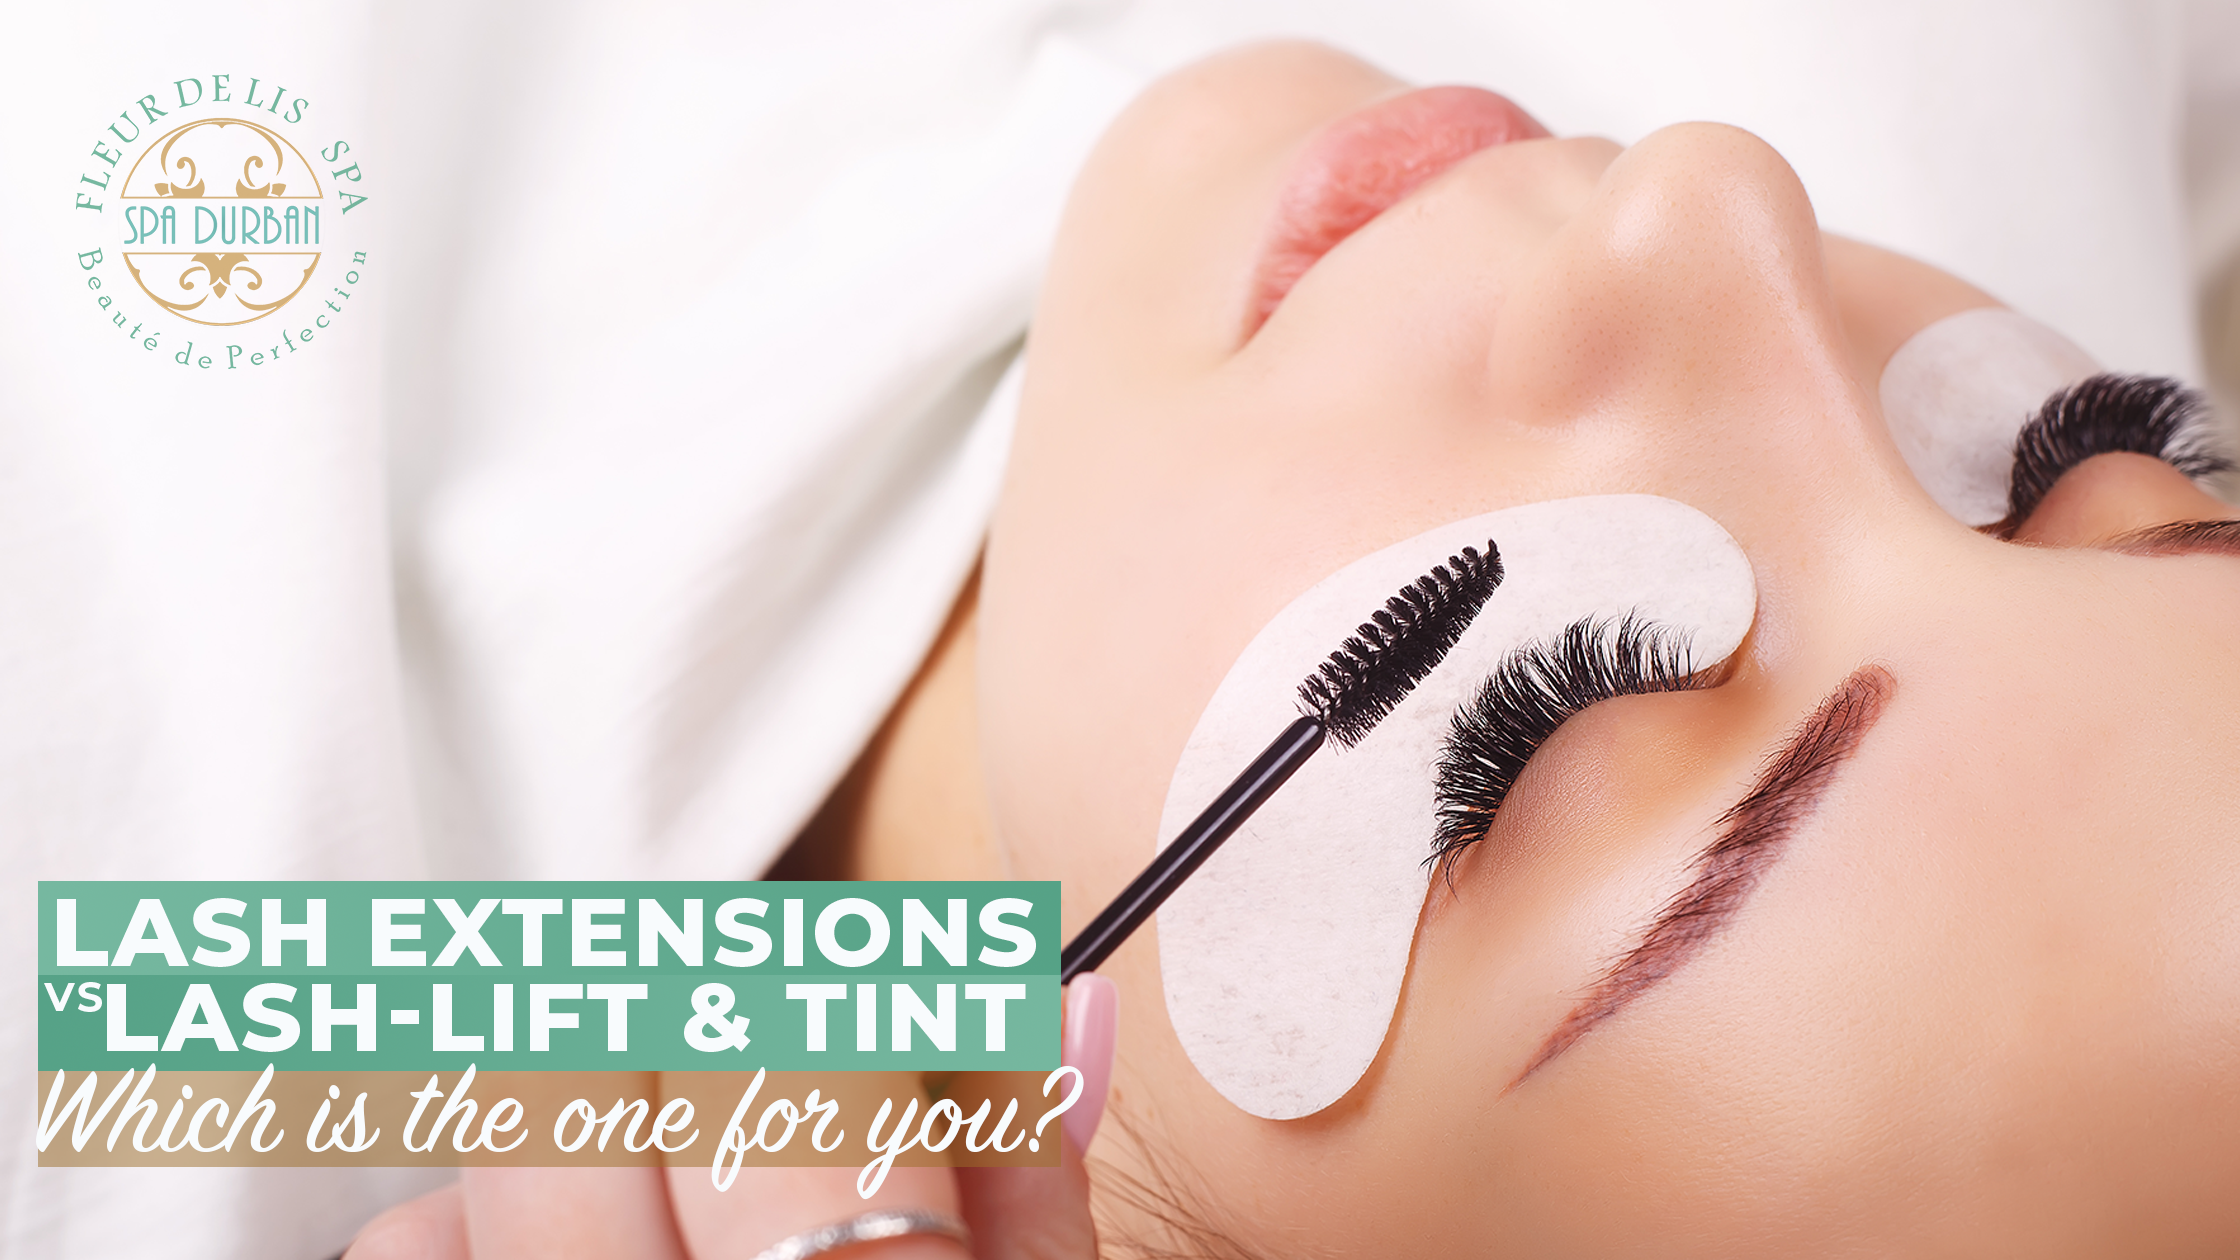 Lash Extensions vs Lash-lift and tint: Which is the one for you?